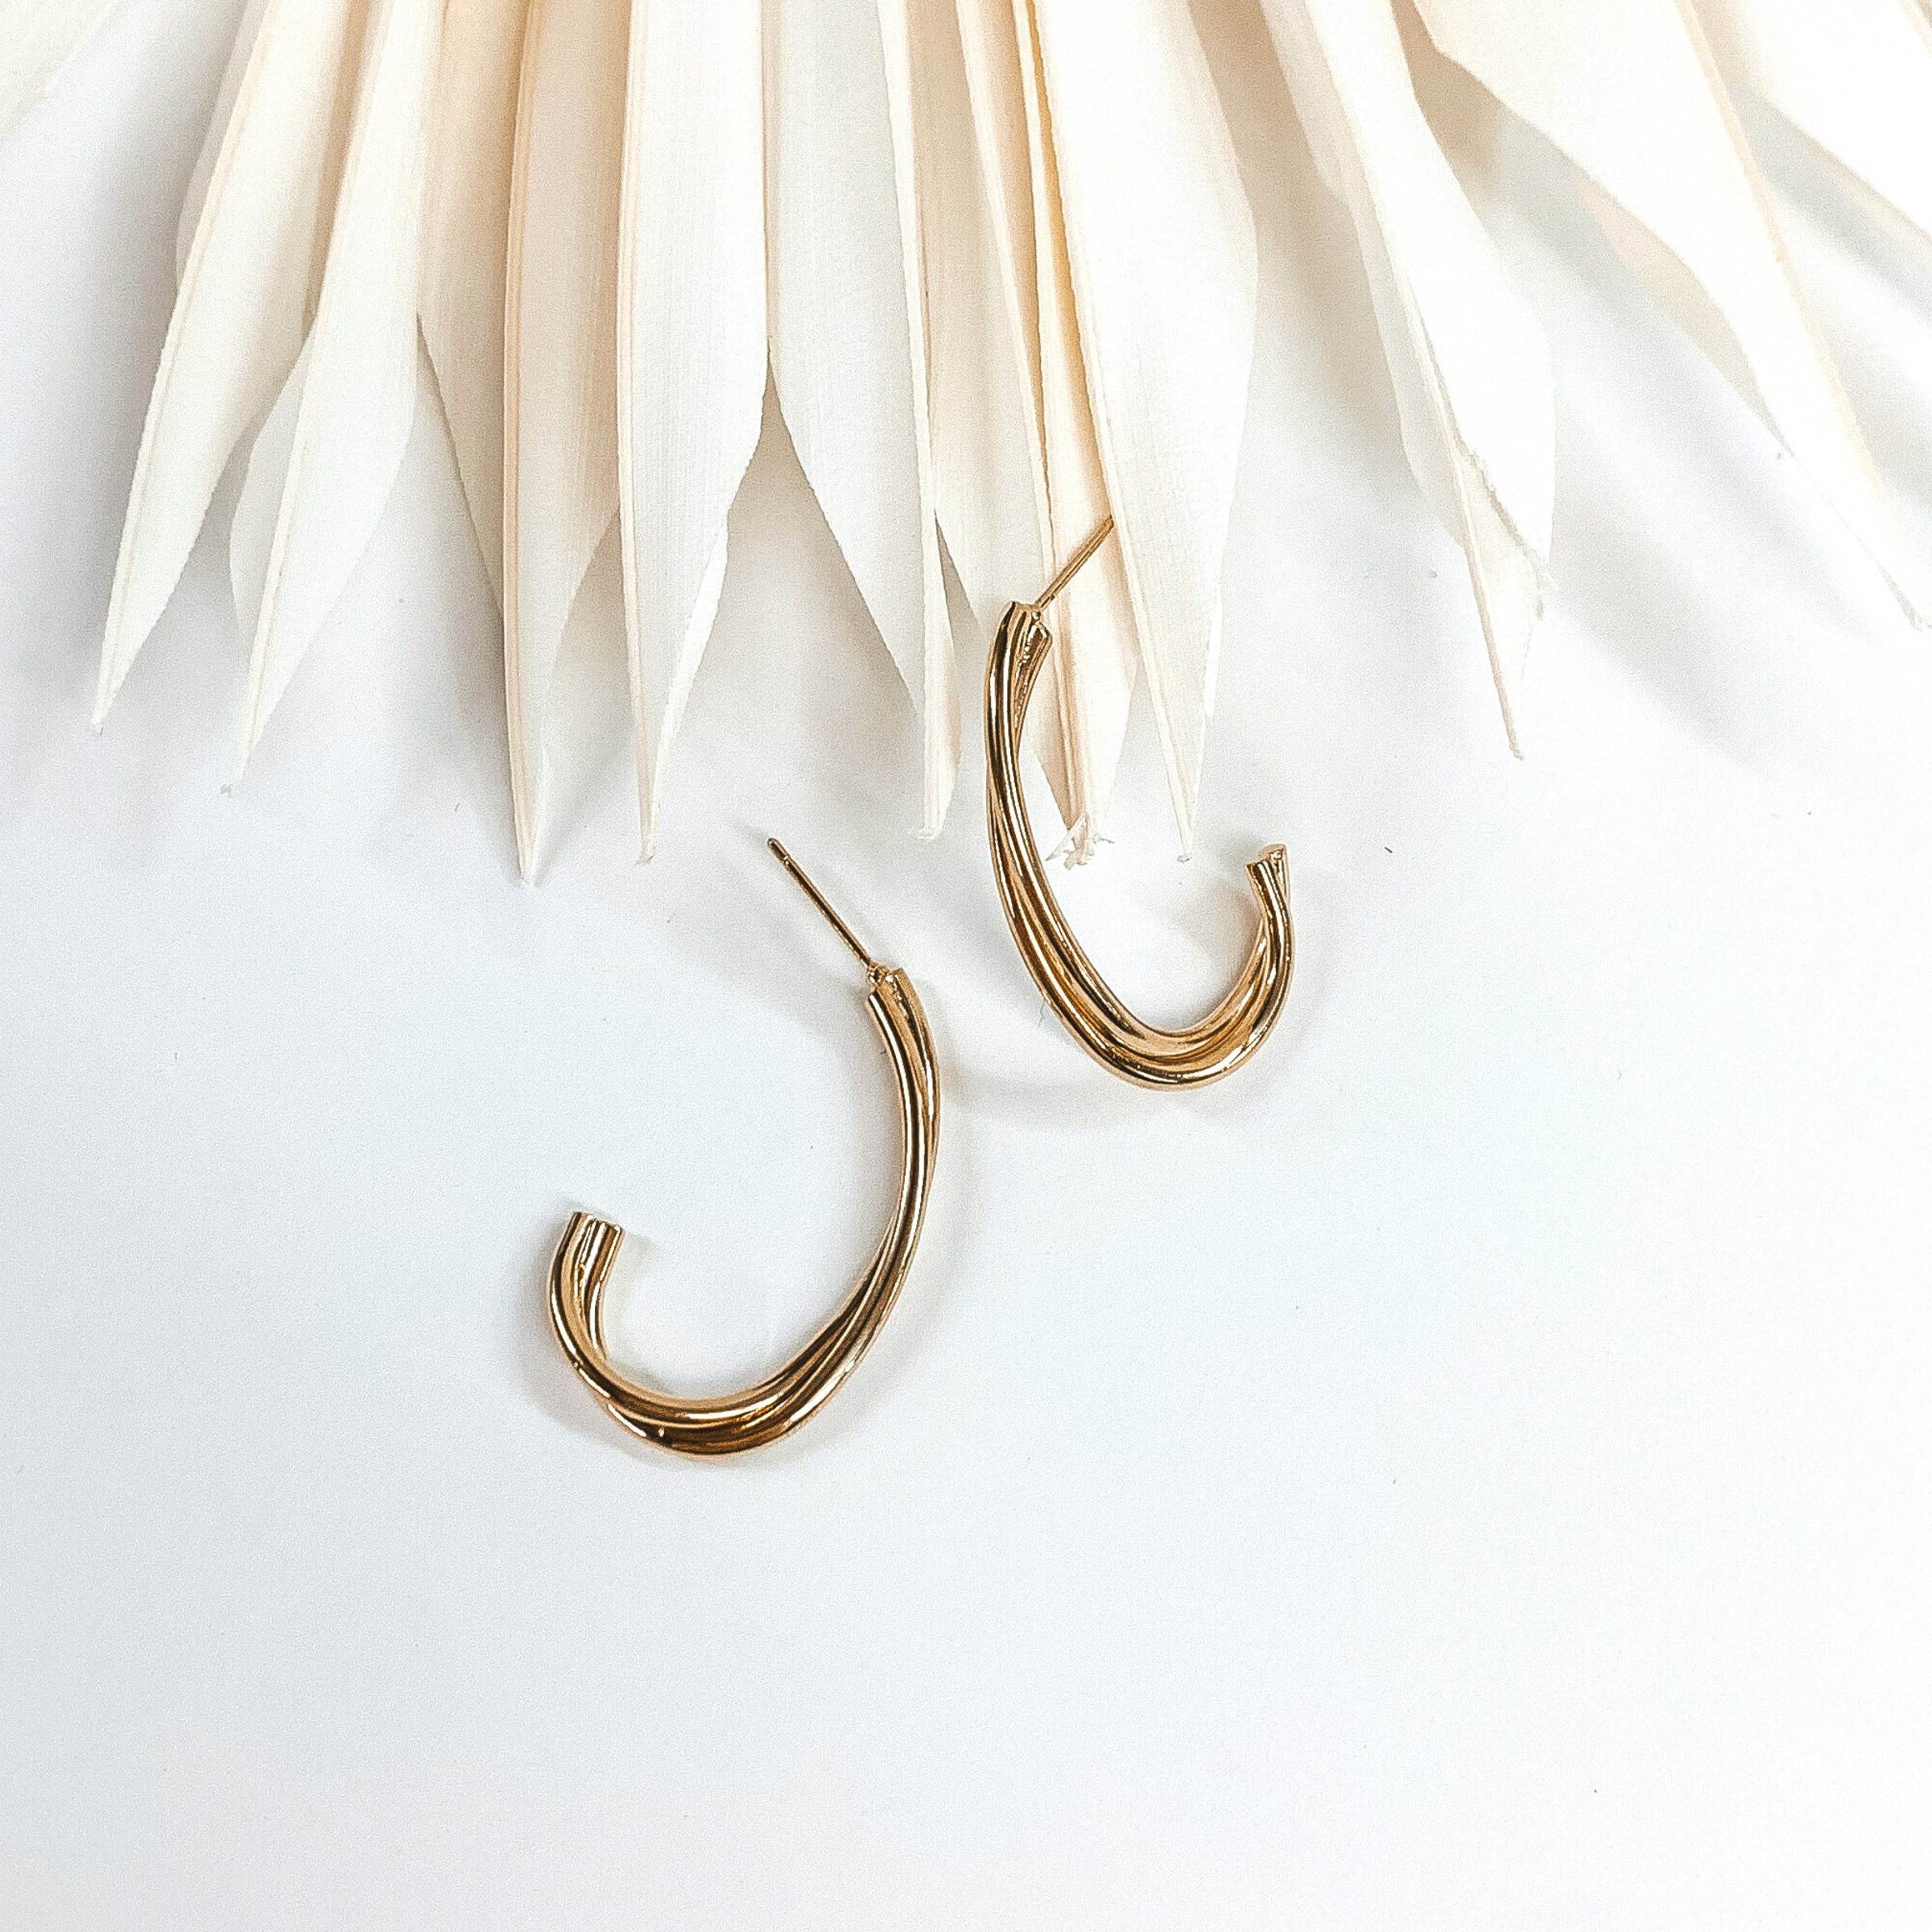 Gold twisted oval hoops with two layers. These earrings are pictured on a white earrings holder laying on white blocks.